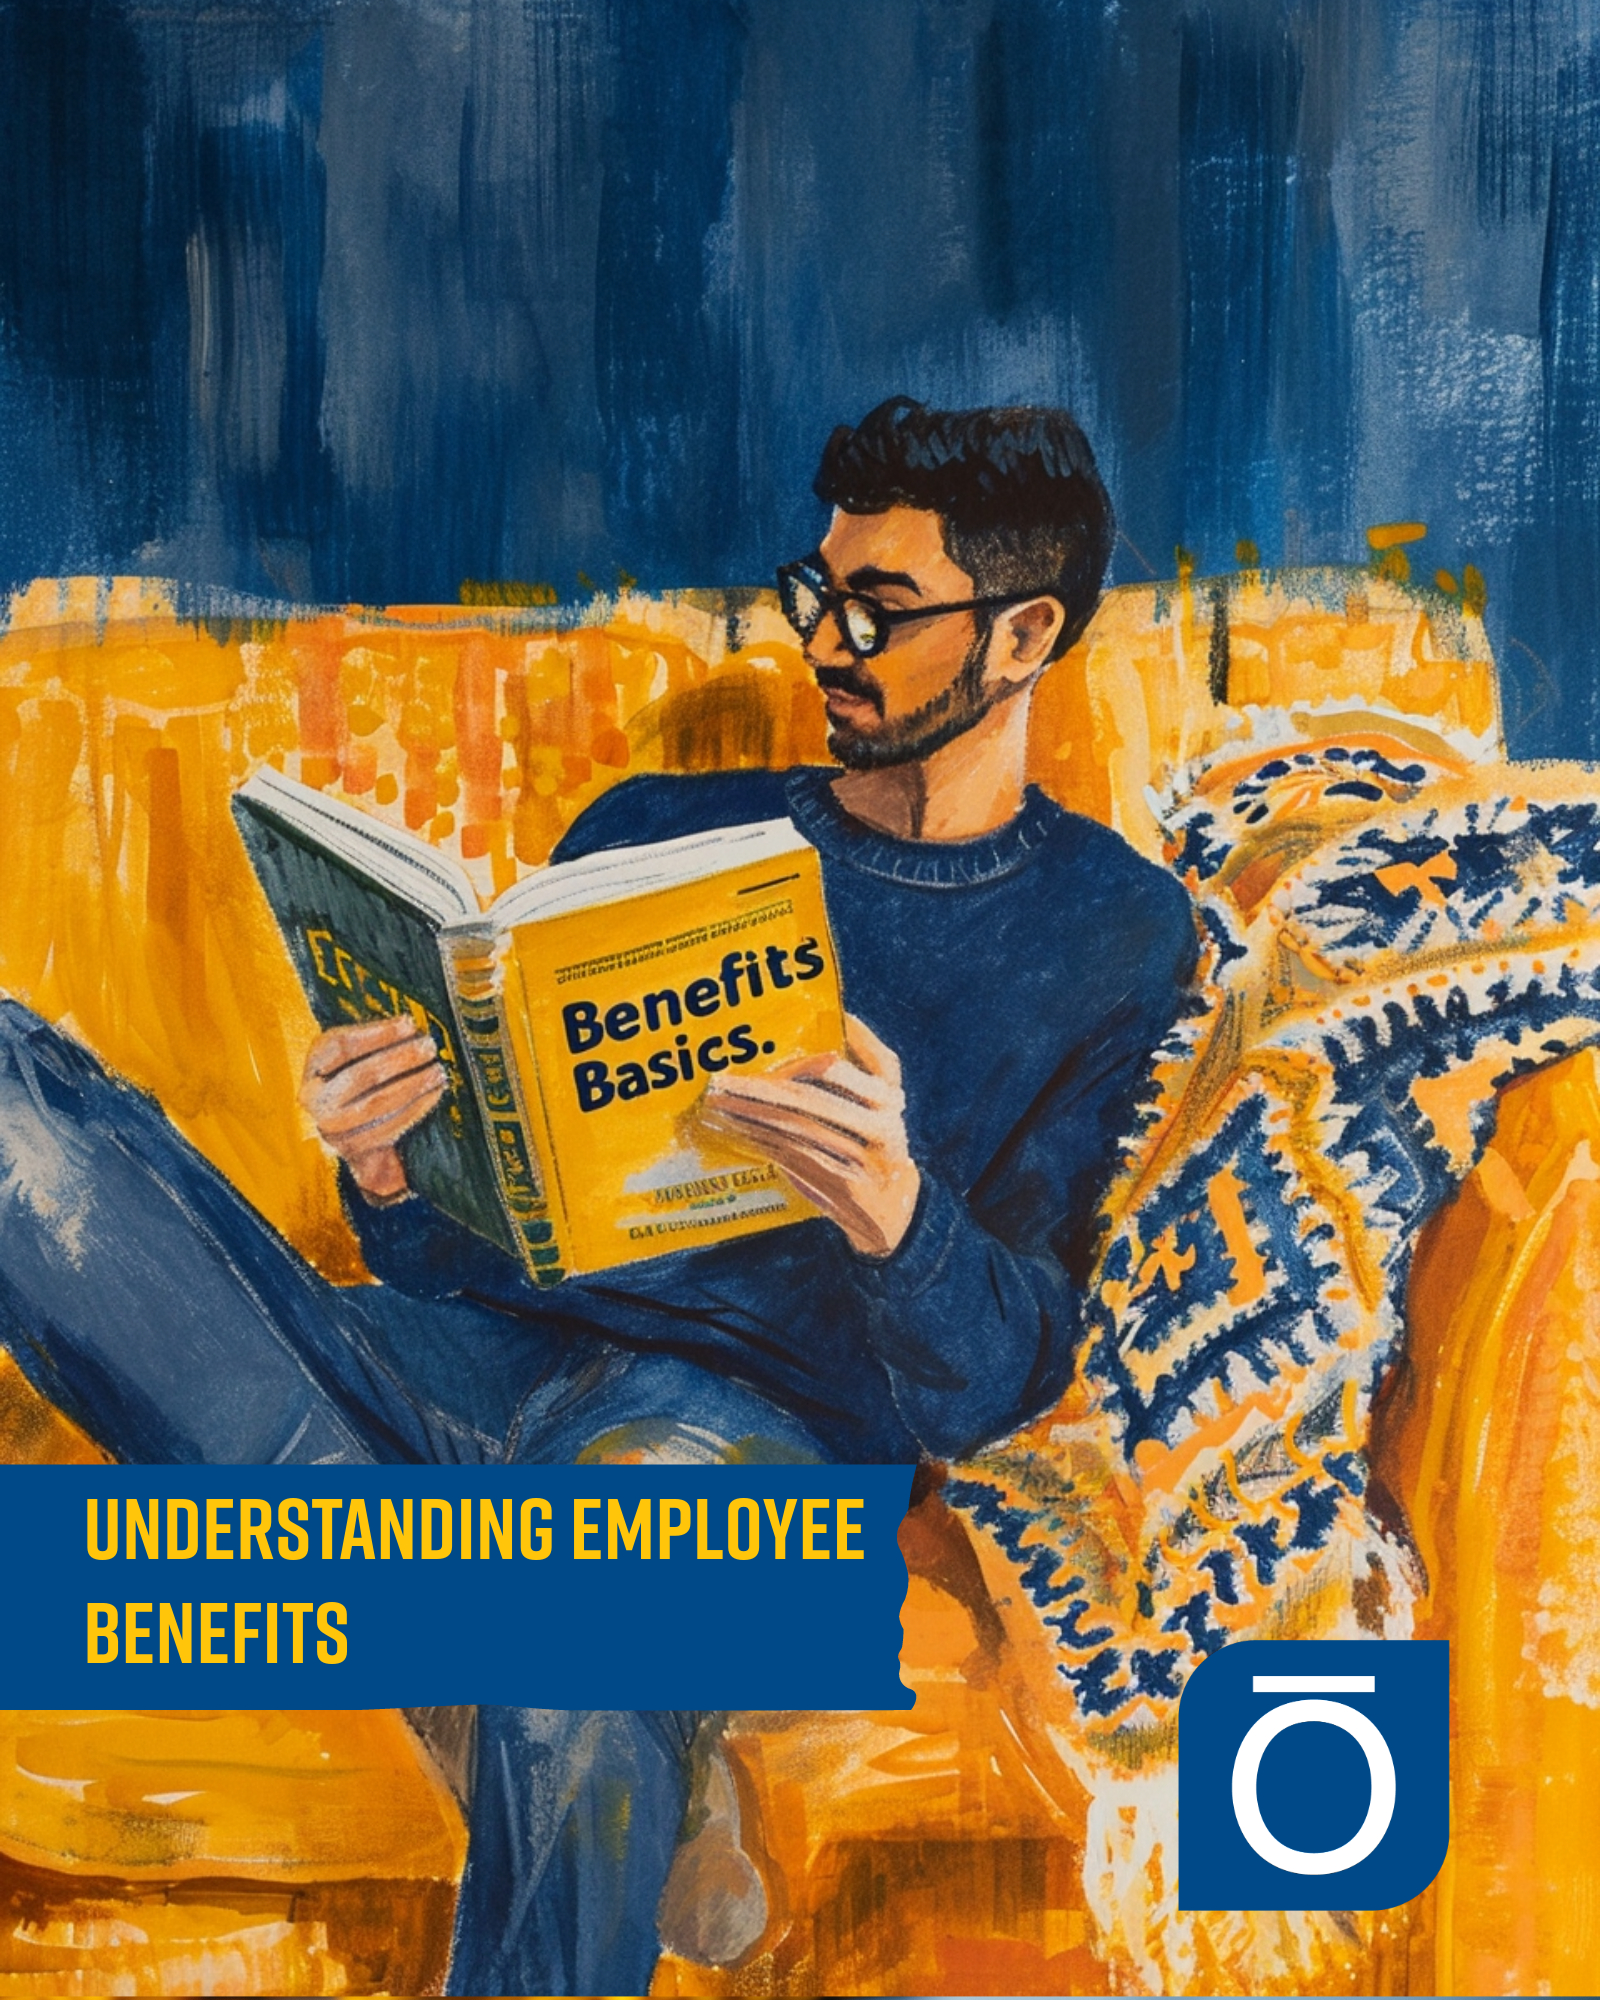 Man reading 'Benefits Basics' book, learning about employee benefits for financial and health well-being.